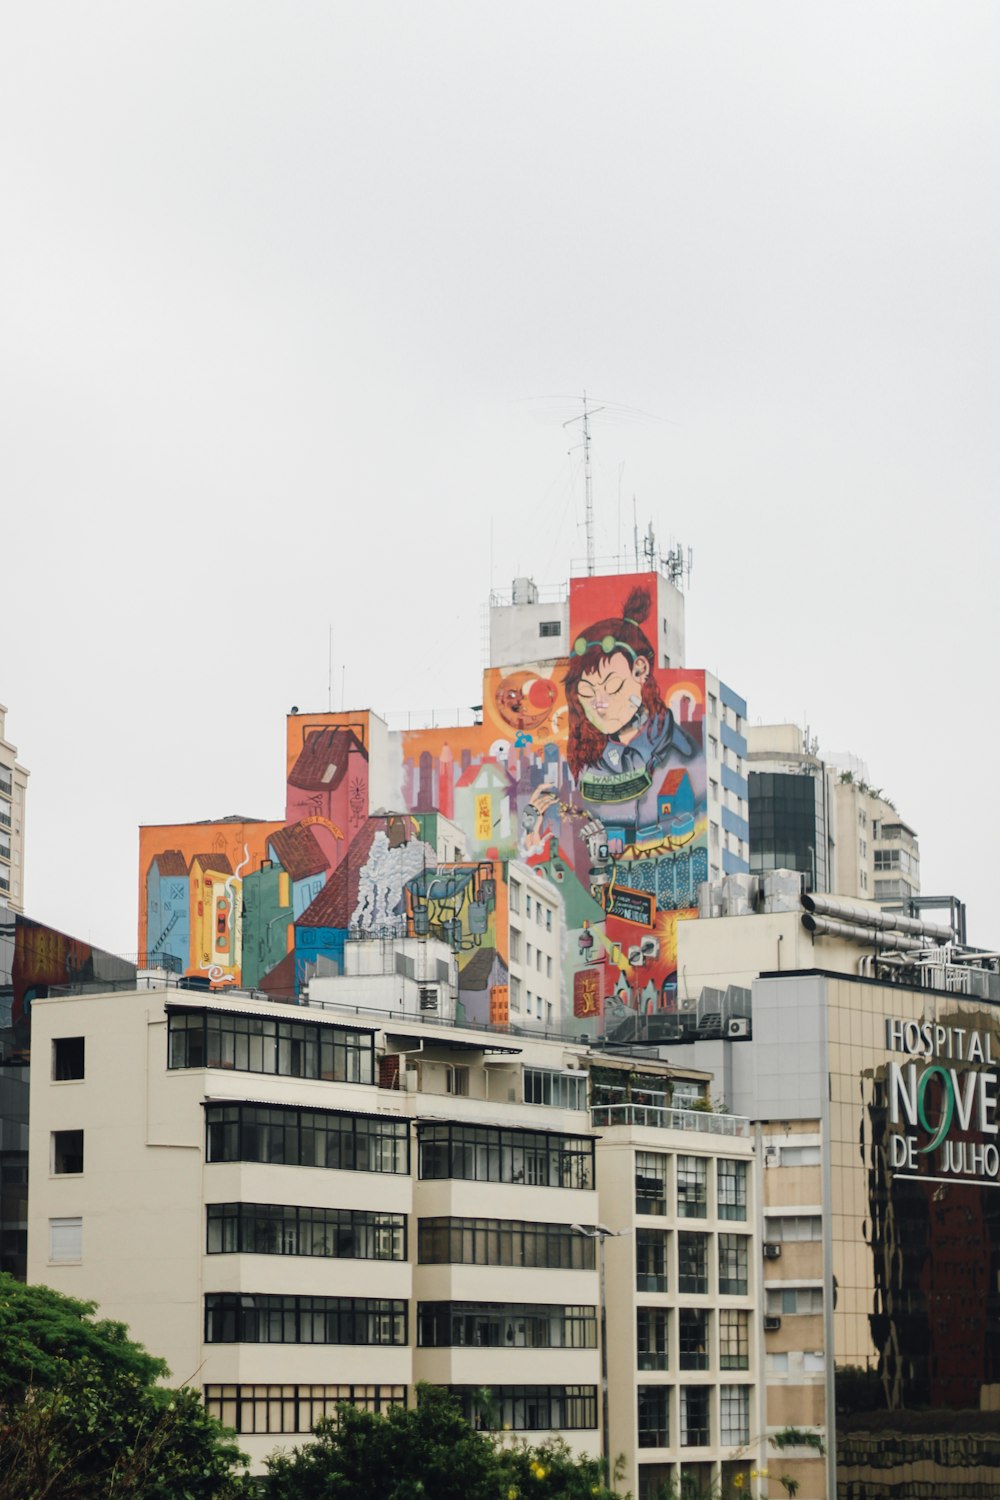 toile mural painting on concrete high-rise buildings